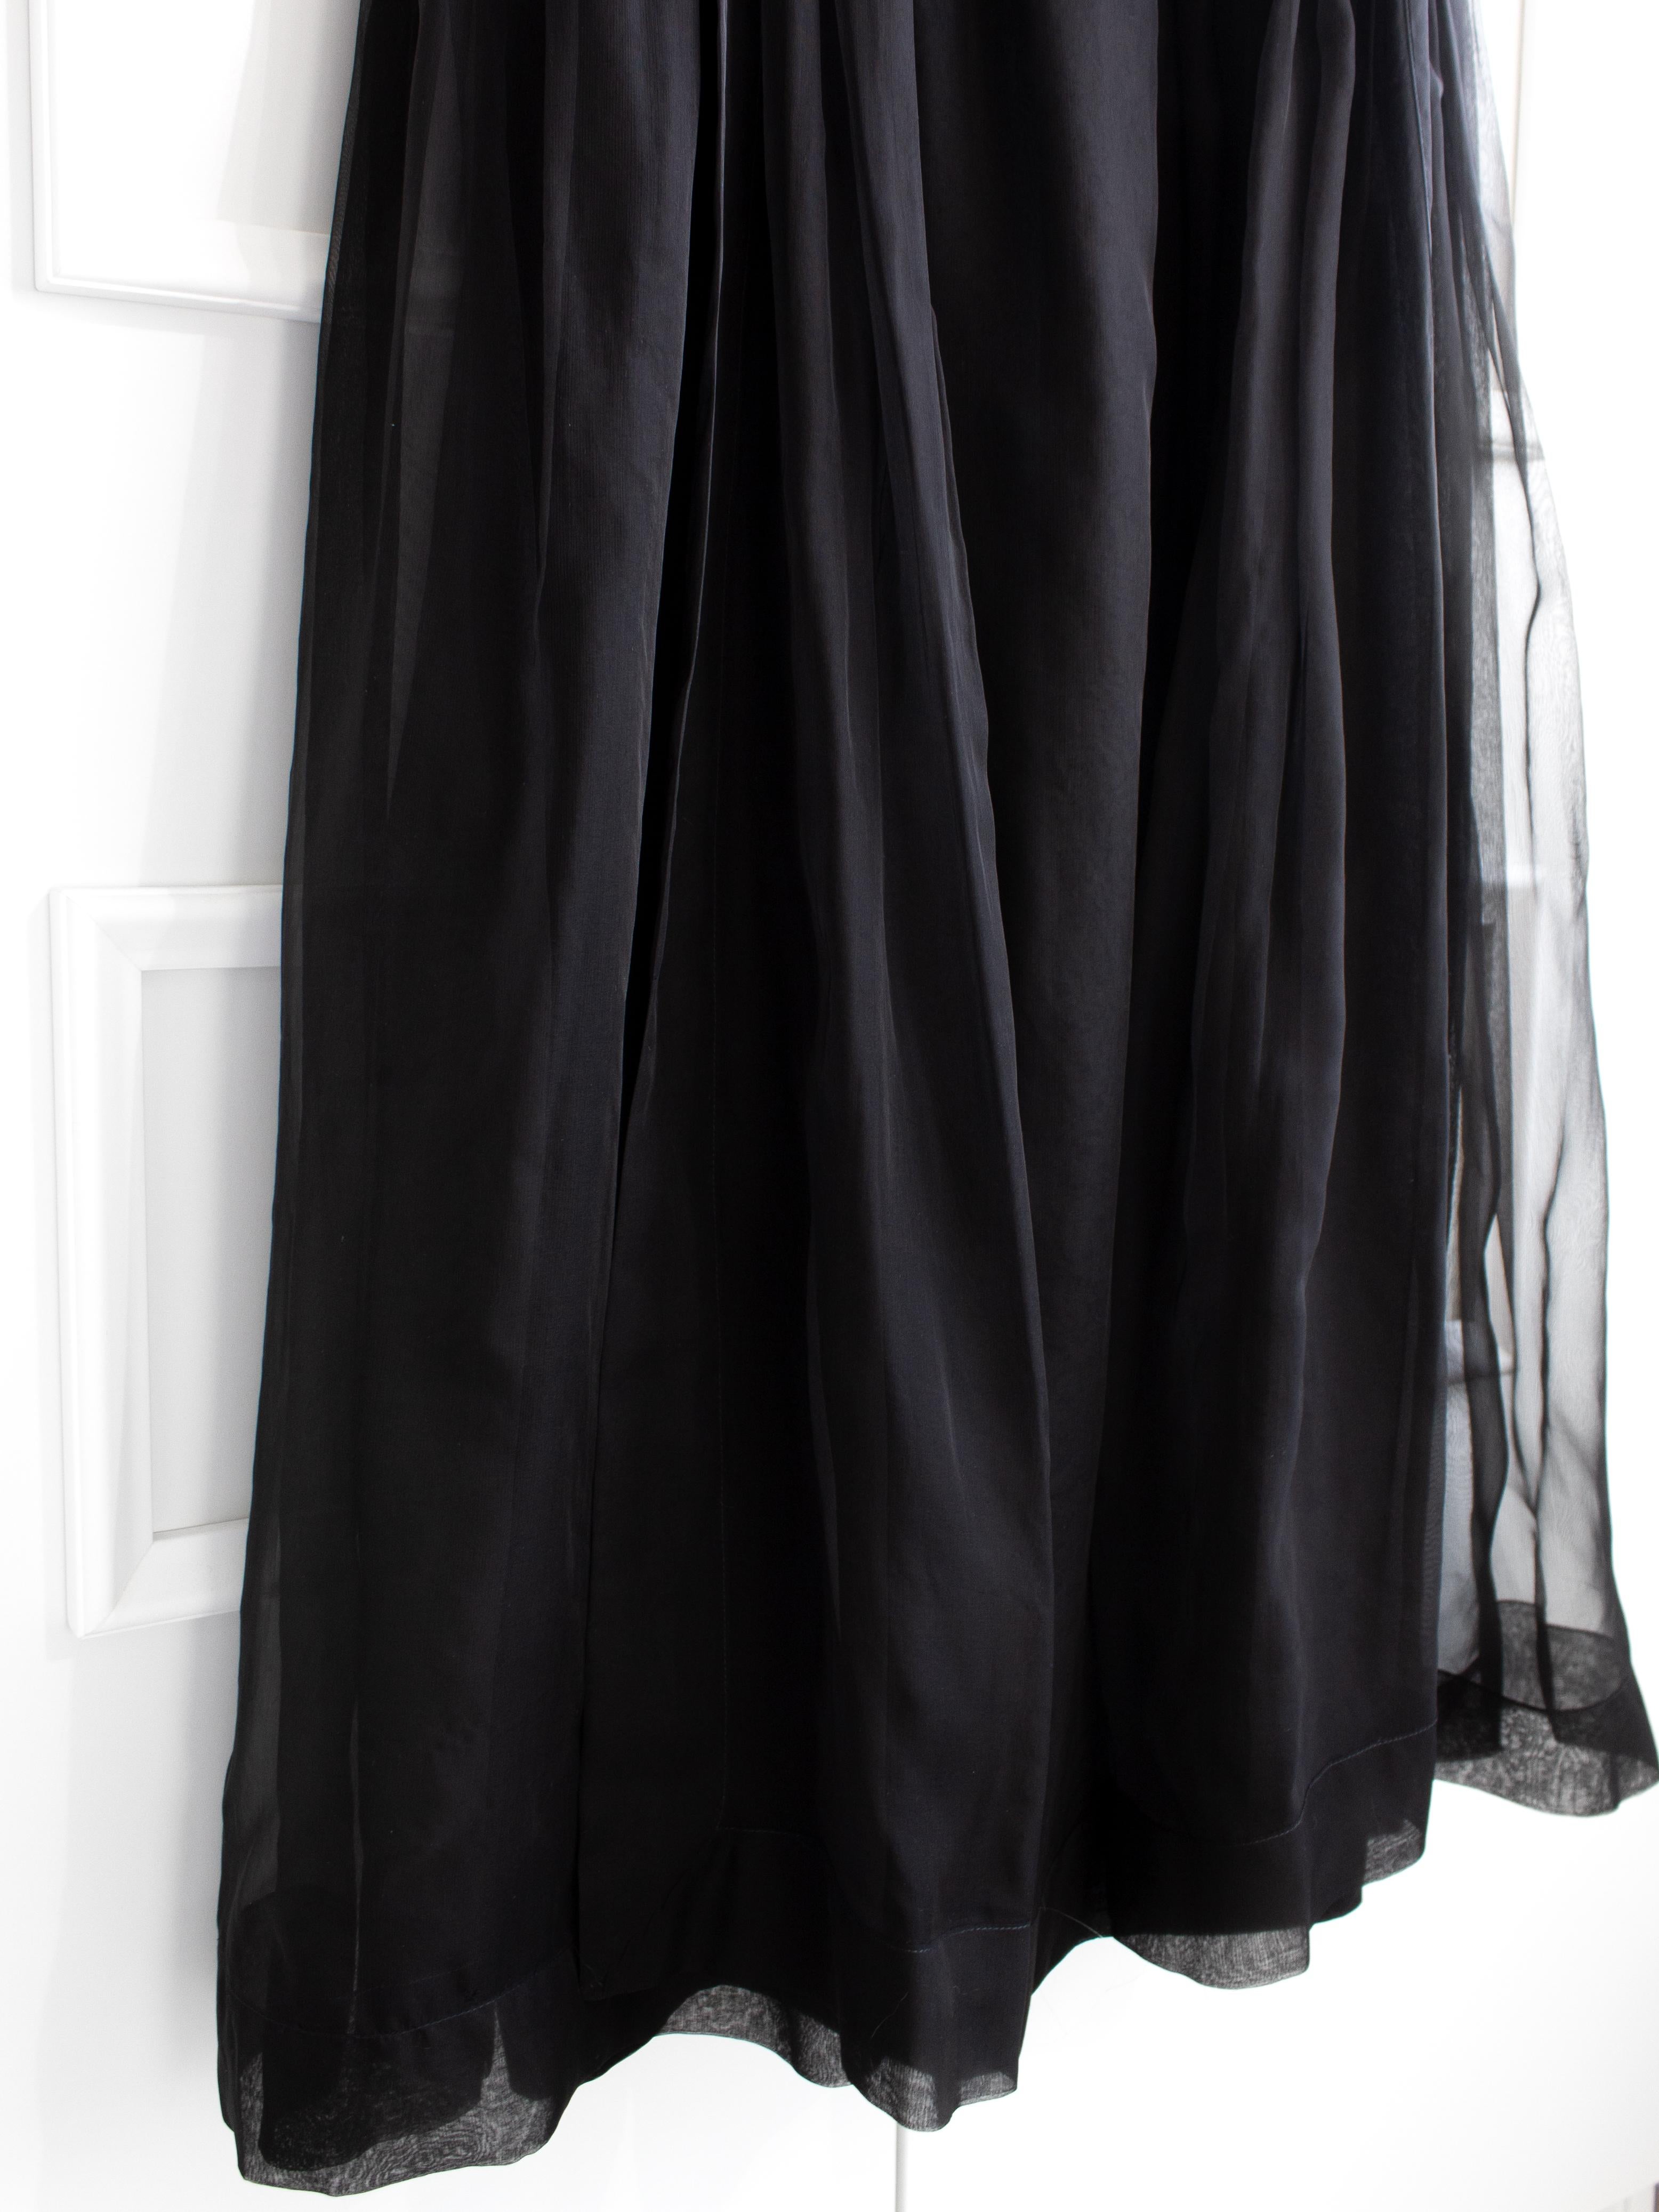 Chanel Vintage S/S 1989 Black Bow Silk Organza Long Gown Evening Dress 12